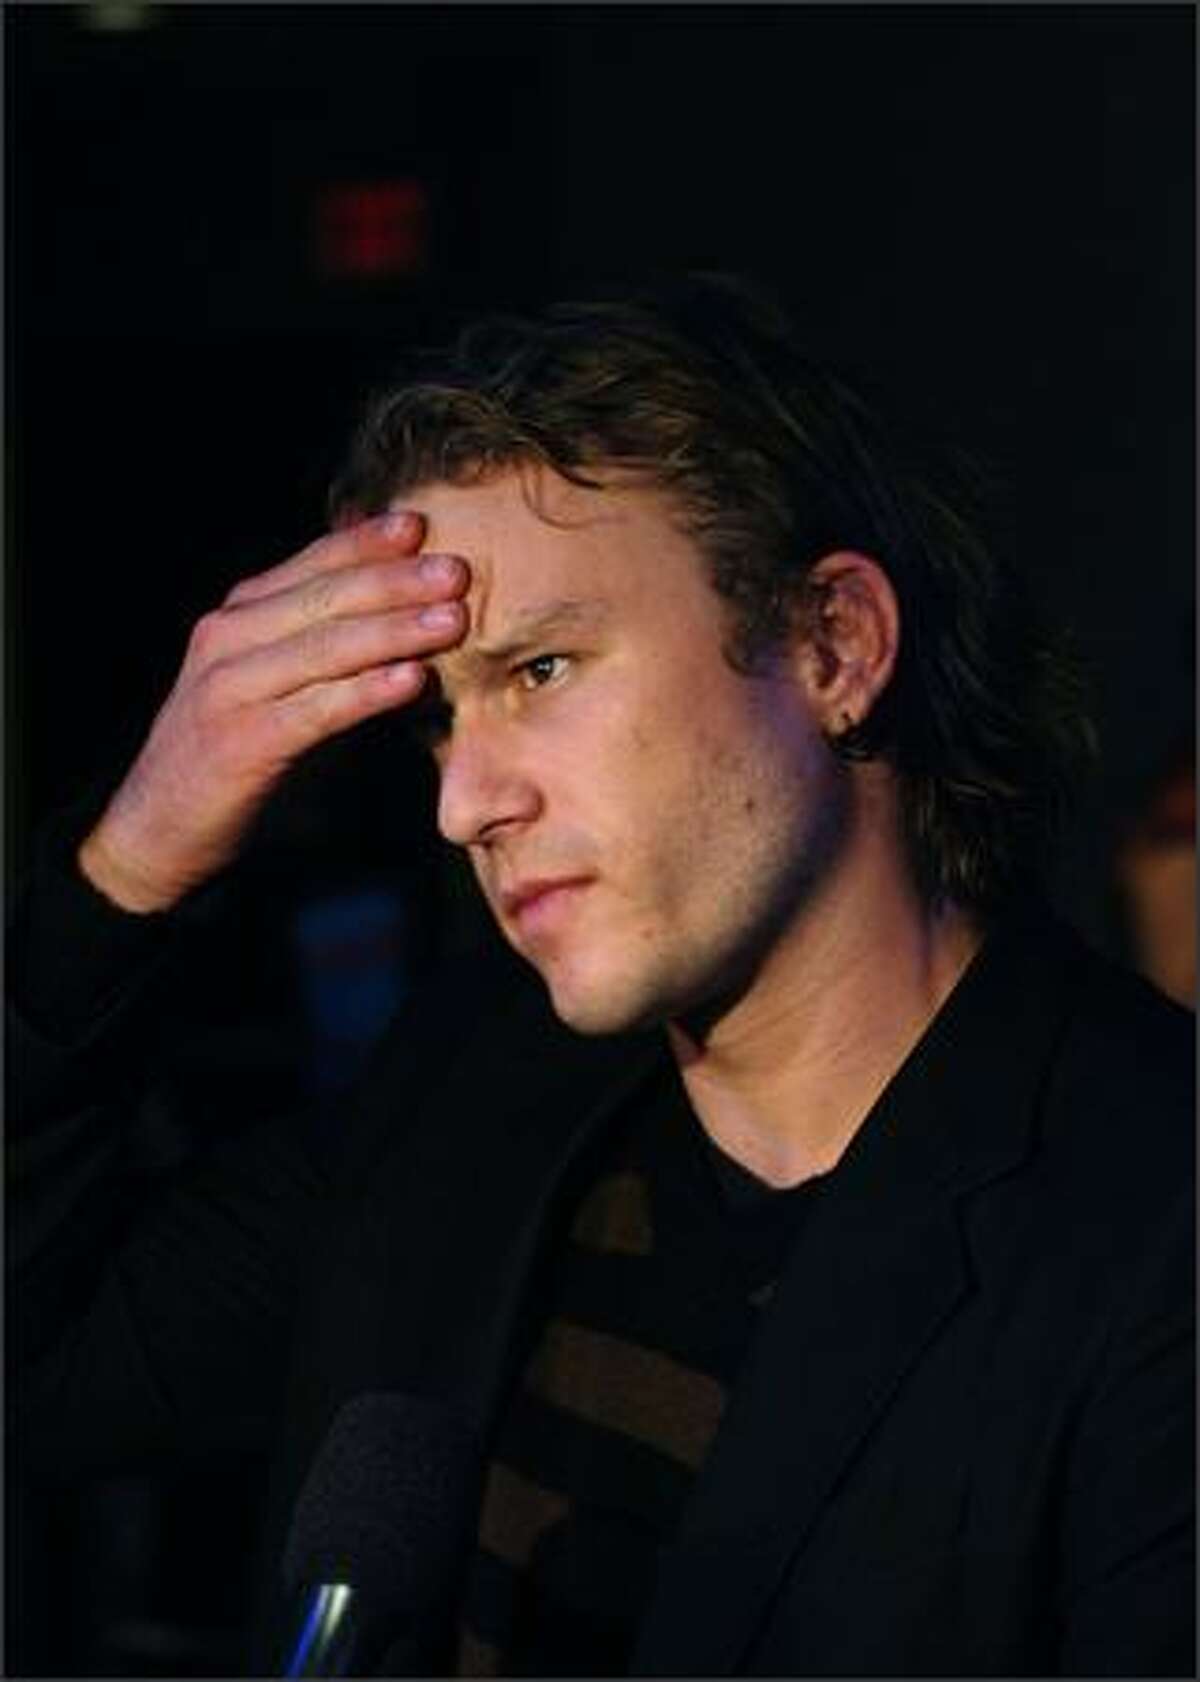 Actor Heath Ledger attends the Toronto International Film Festival premiere screening of "Candy" held at Varsity 8 on September 8, 2006 in Toronto, Canada.